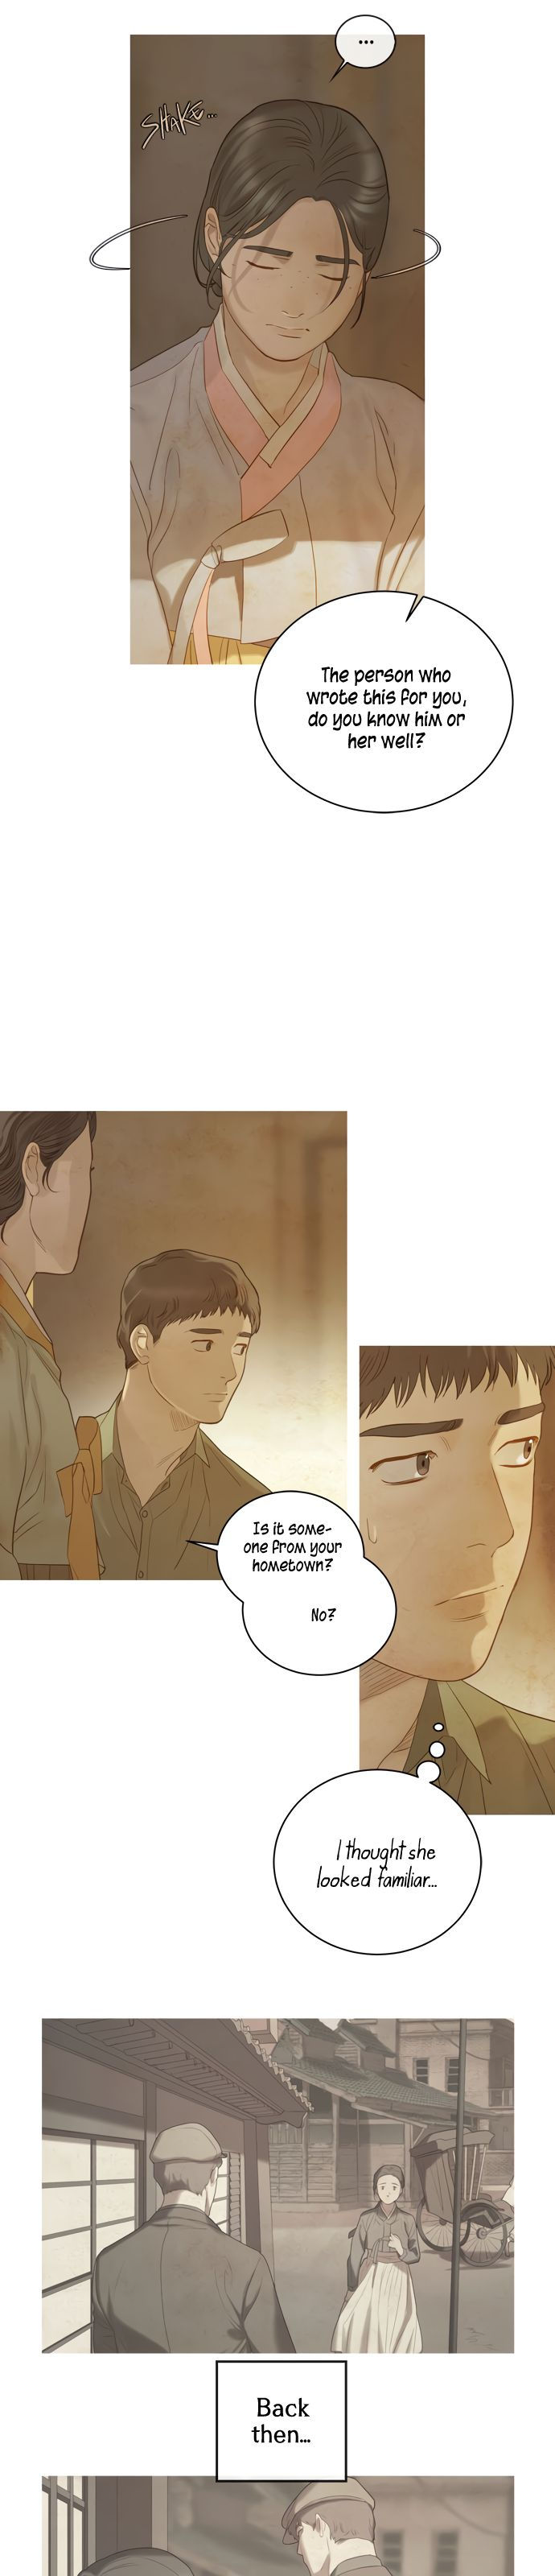 Gorae Byul - The Gyeongseong Mermaid - Chapter 20 Page 18